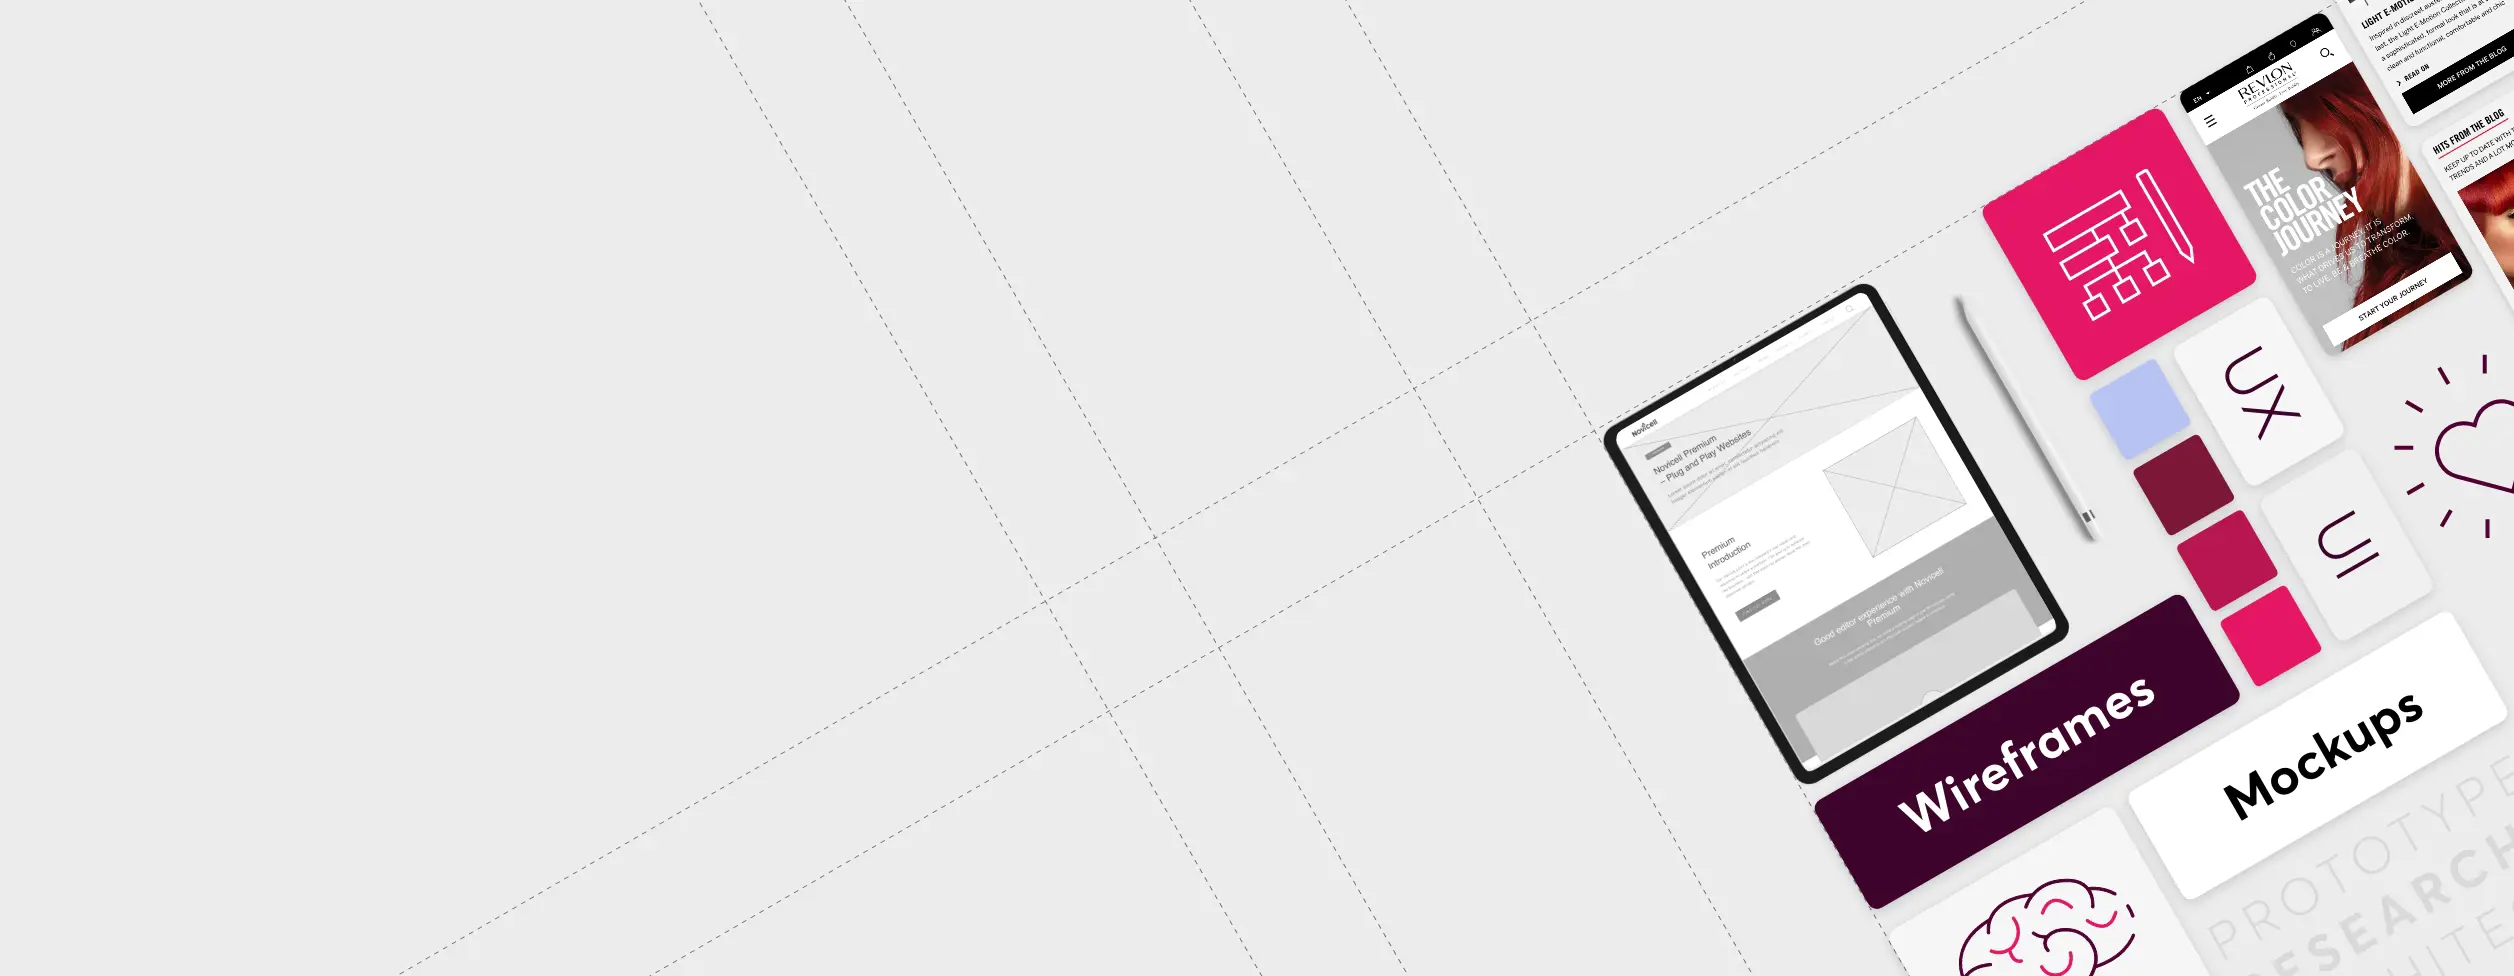 Various UX design elements including wireframes, mockups, and icons